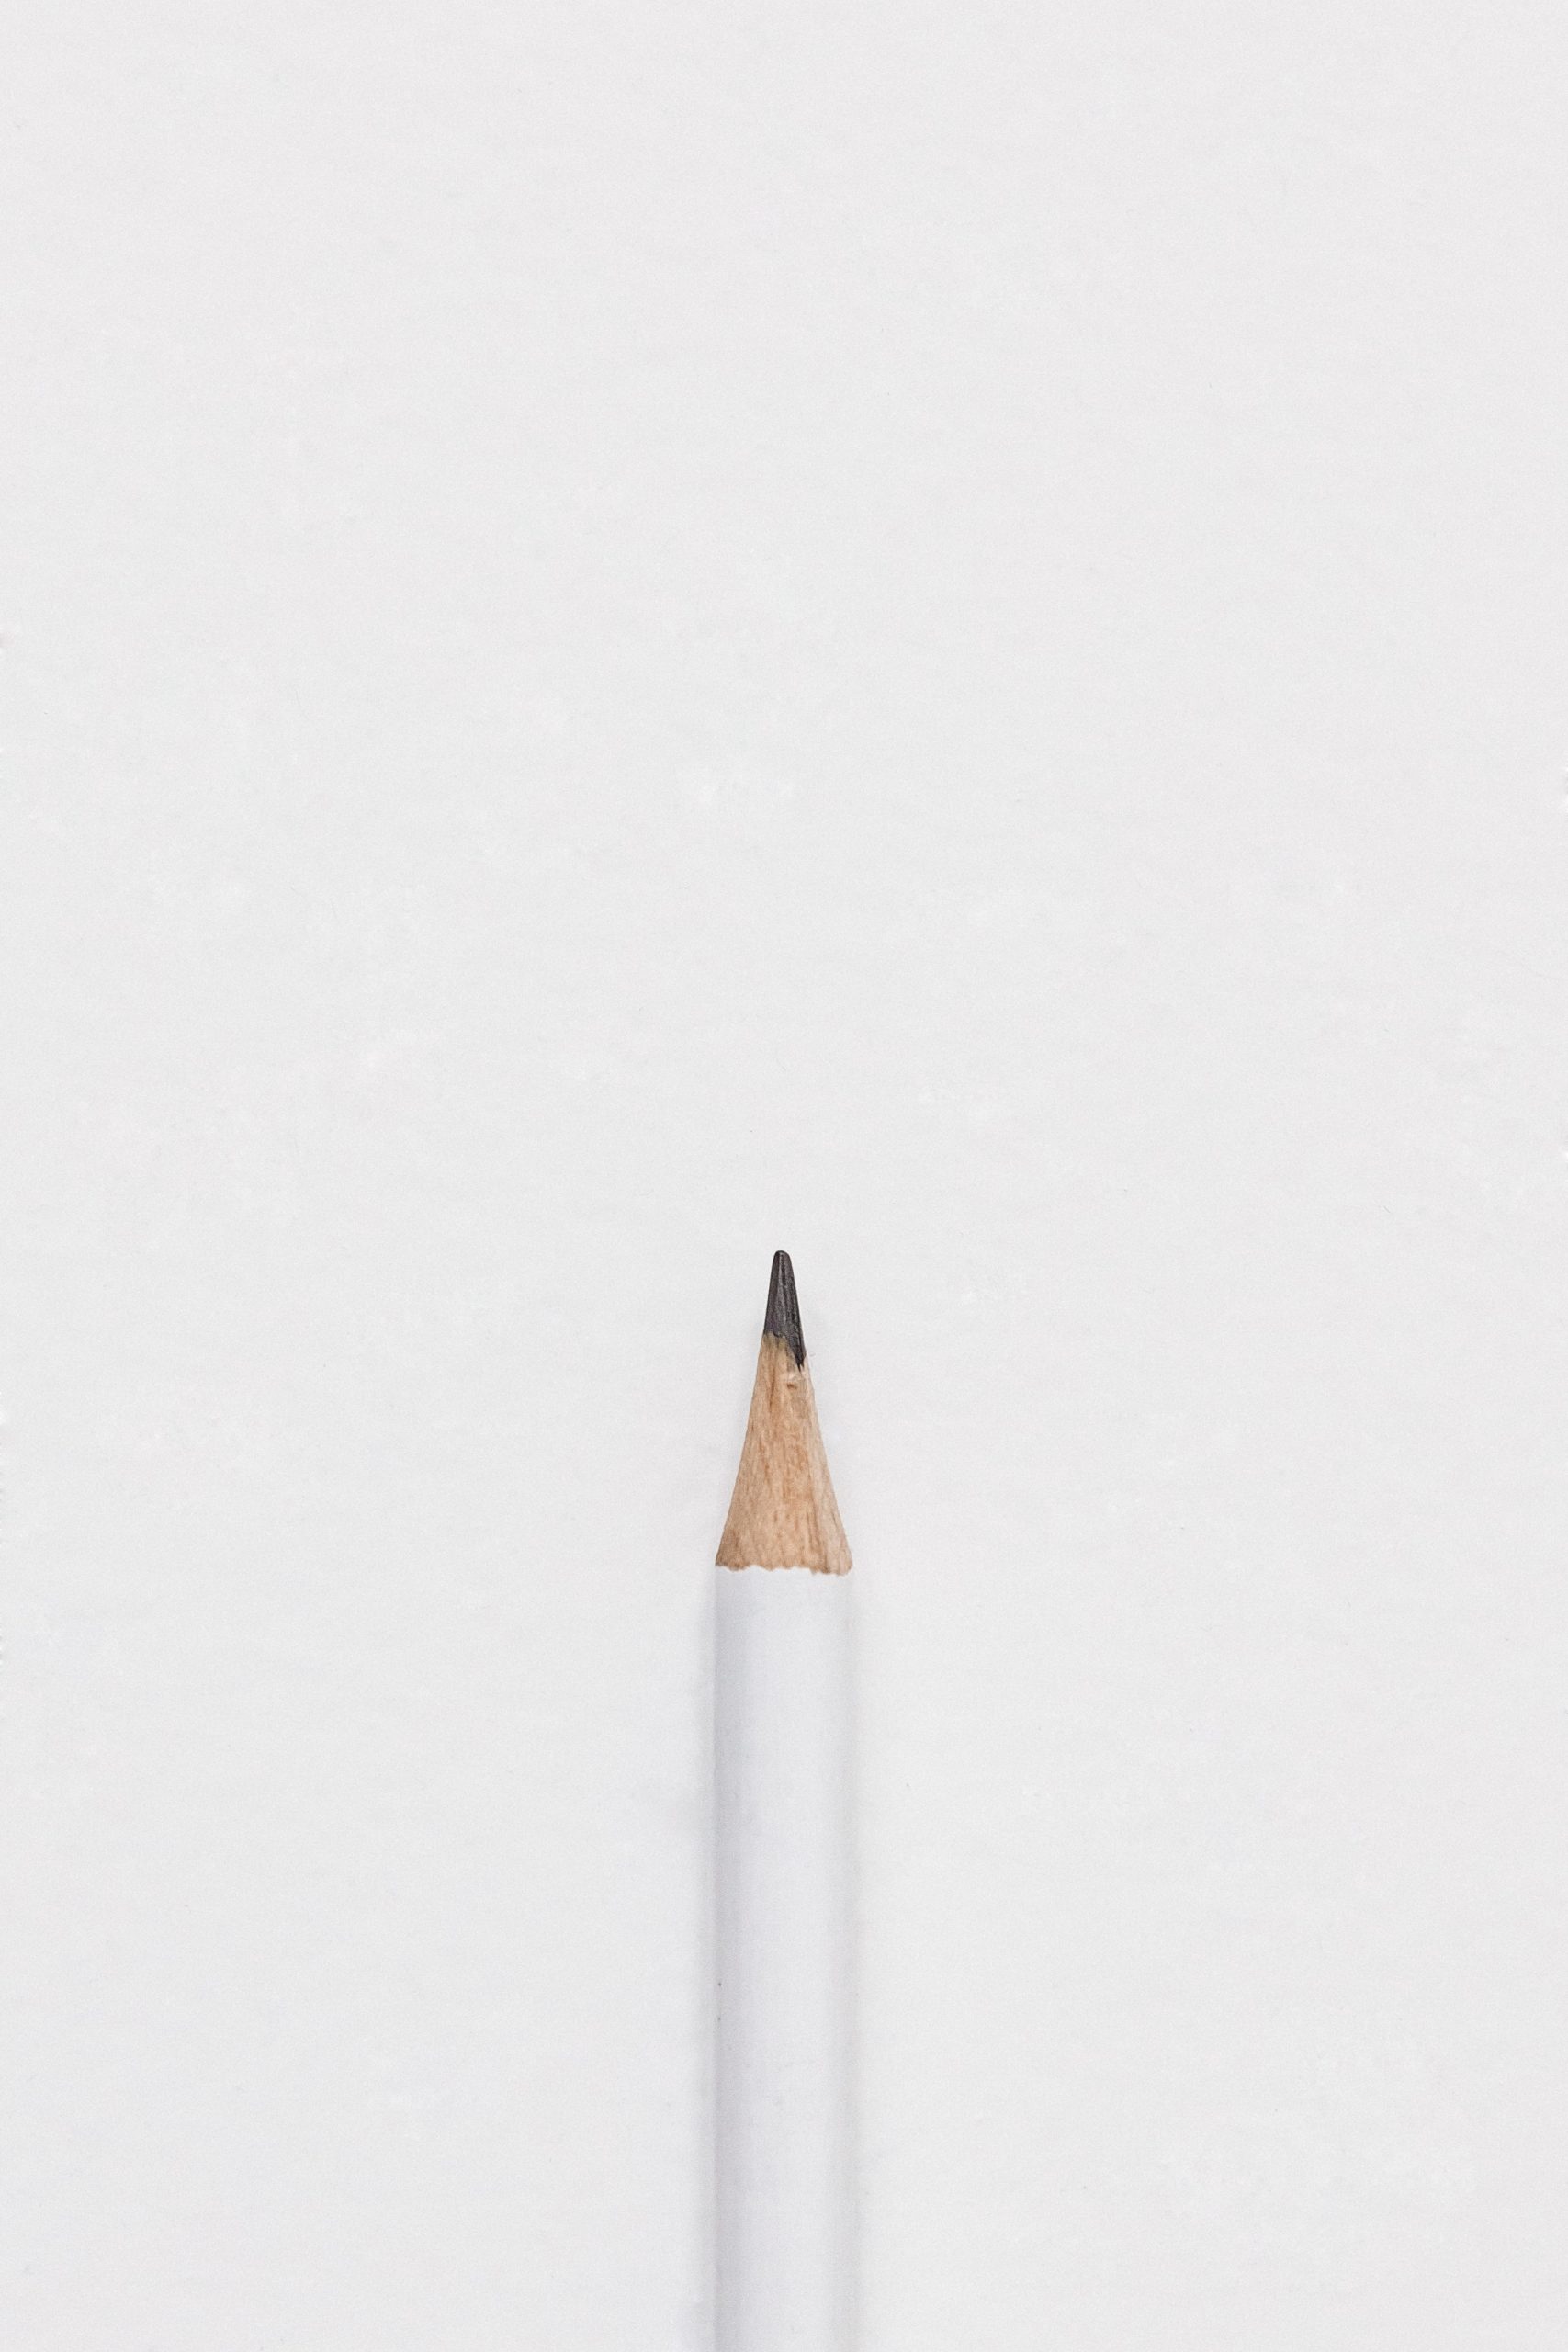 White lead pencil on surface